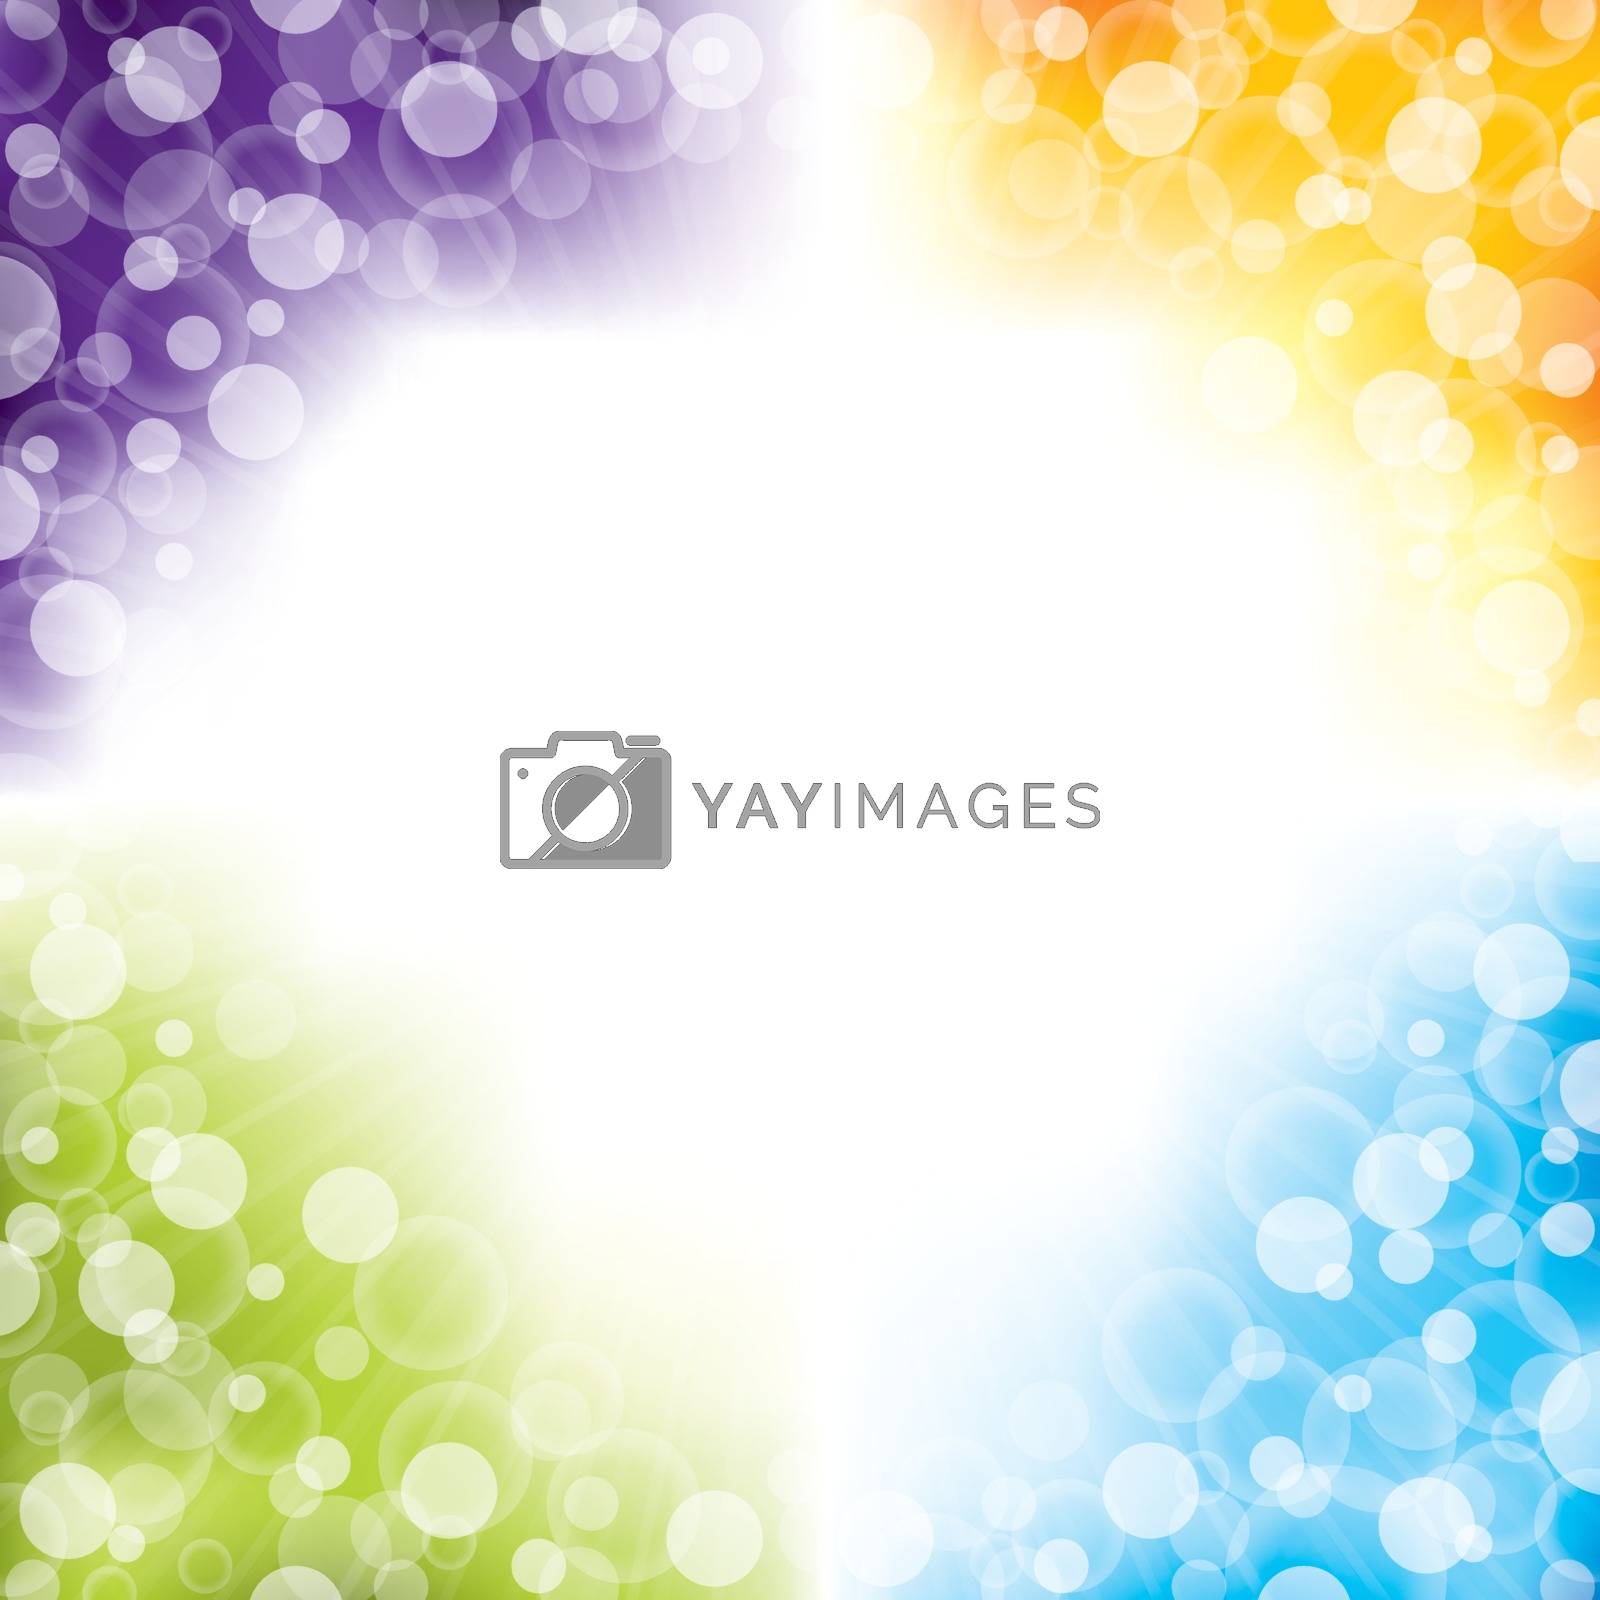 Royalty free image of Colorful abstract background design with four colors by vipervxw